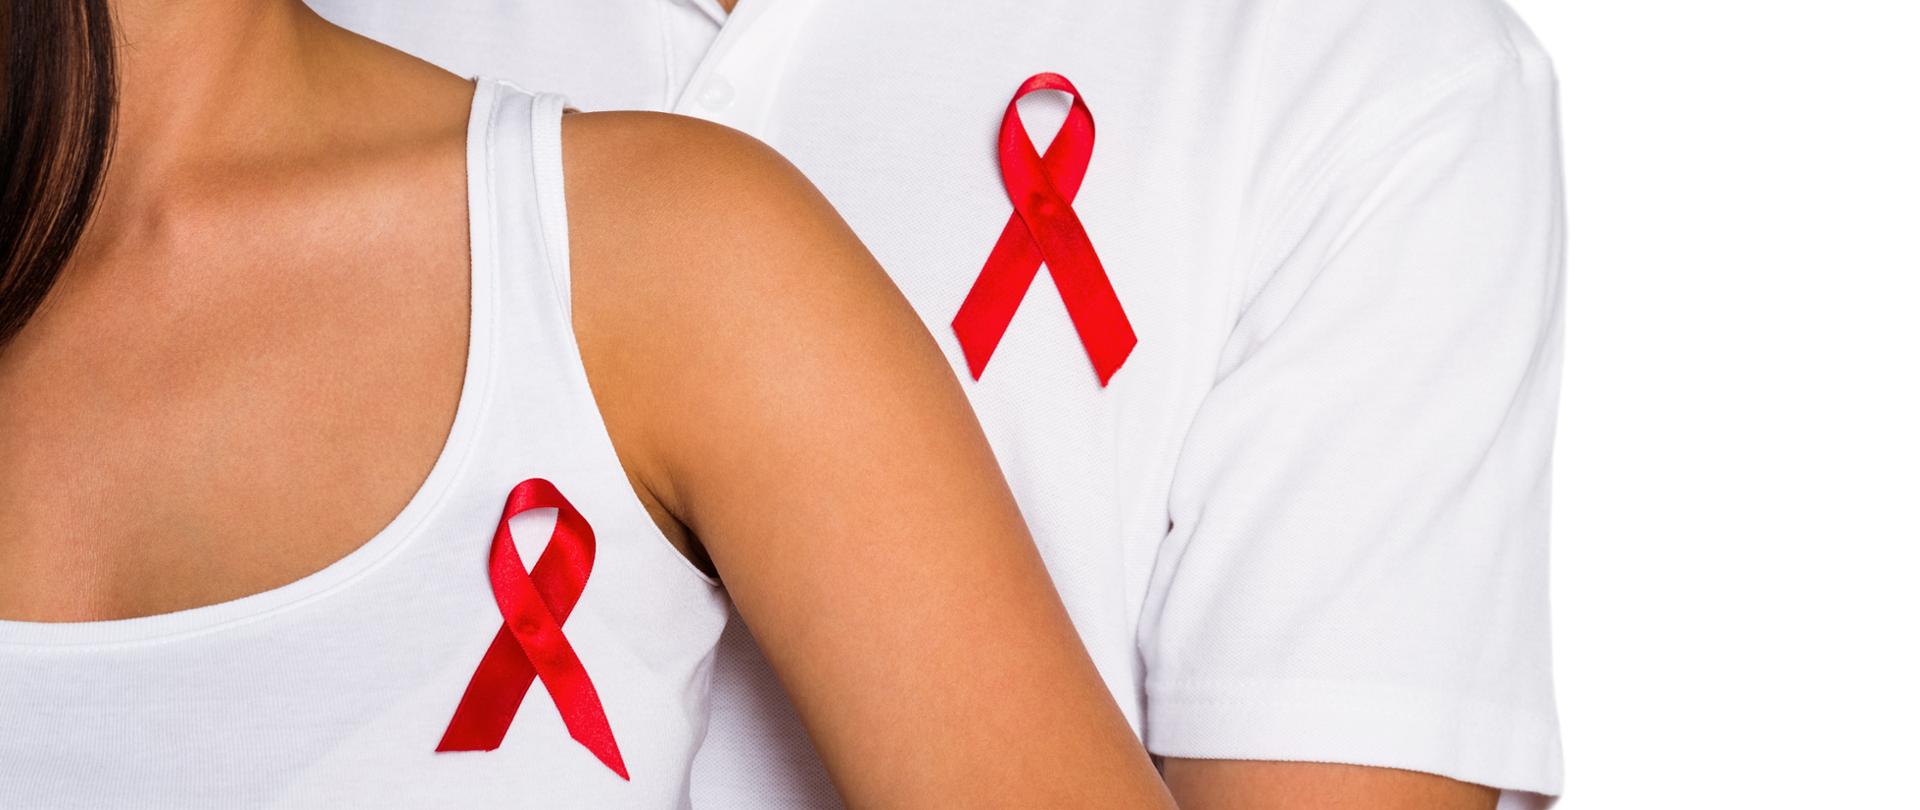 Couple supporting aids awareness together on white background